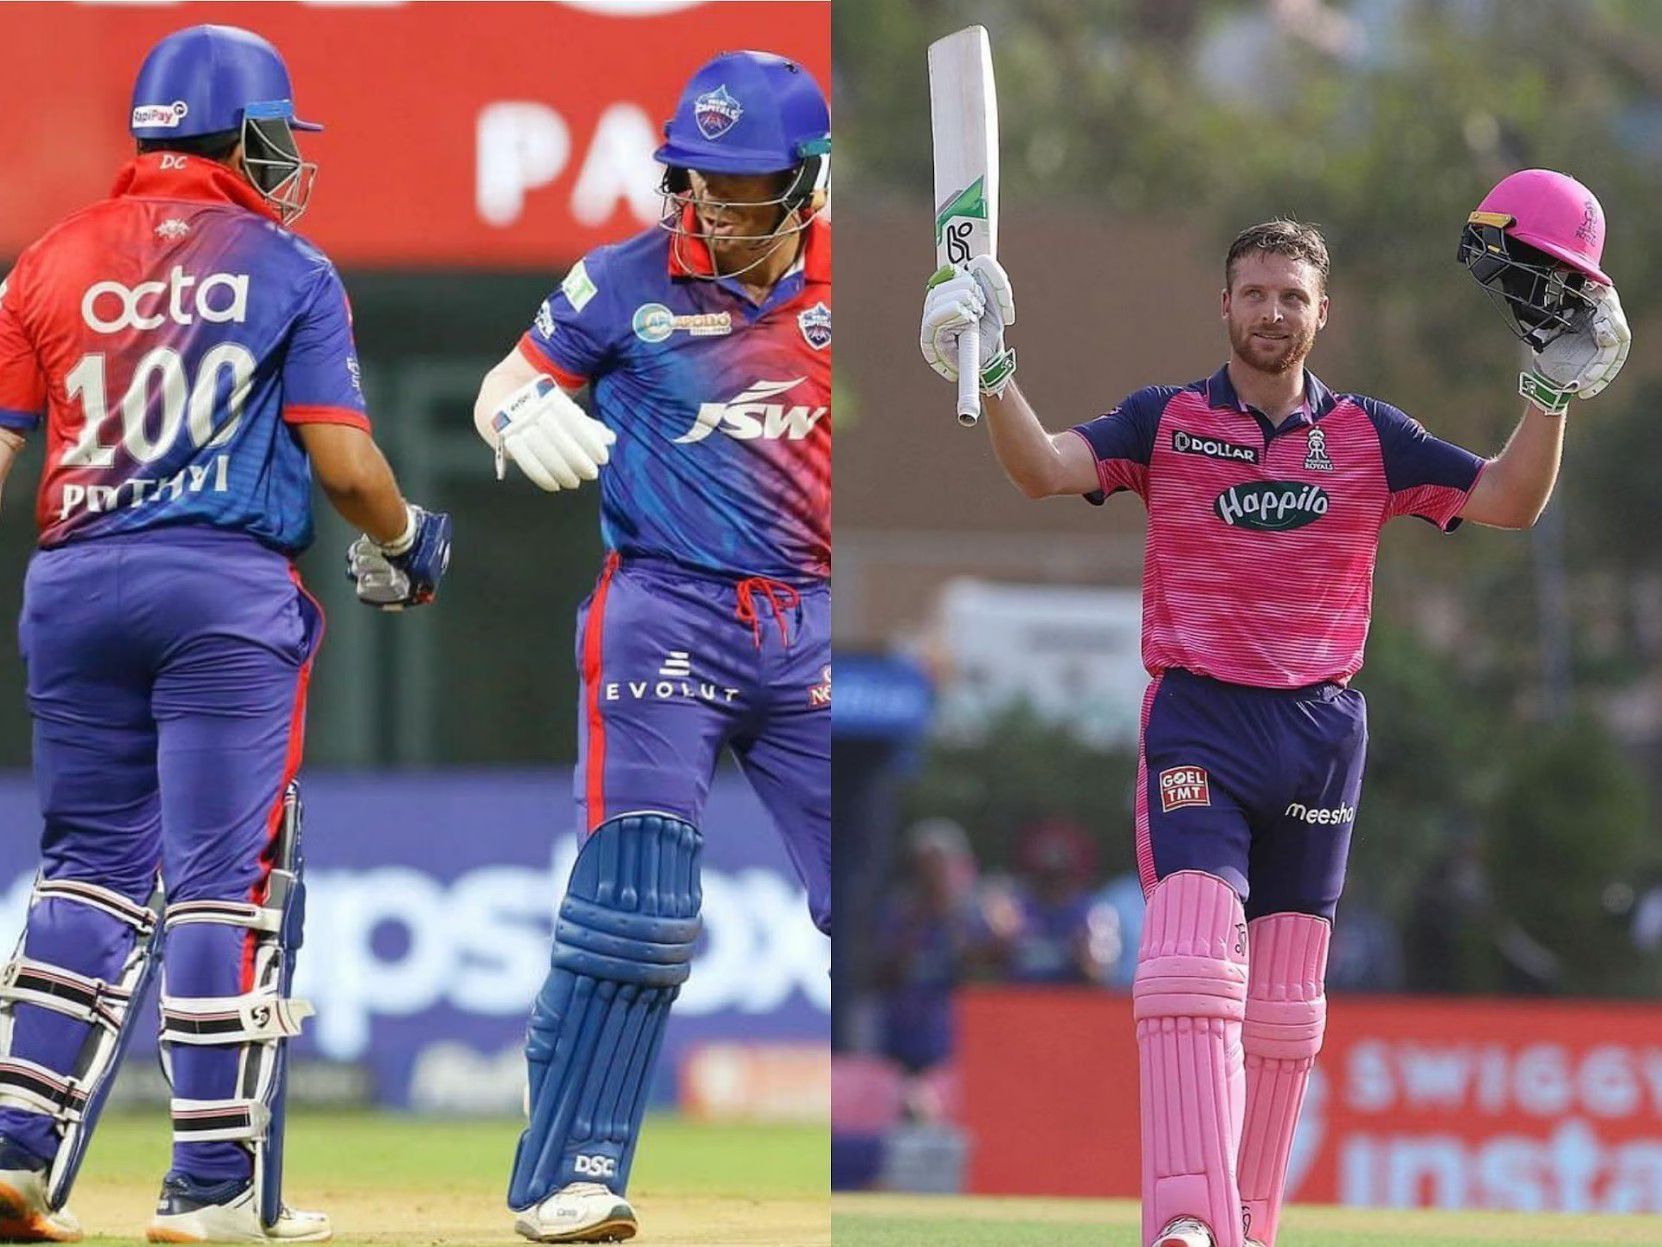 The Match 58 of IPL 2022 will be played between Rajasthan Royals and Delhi Capitals